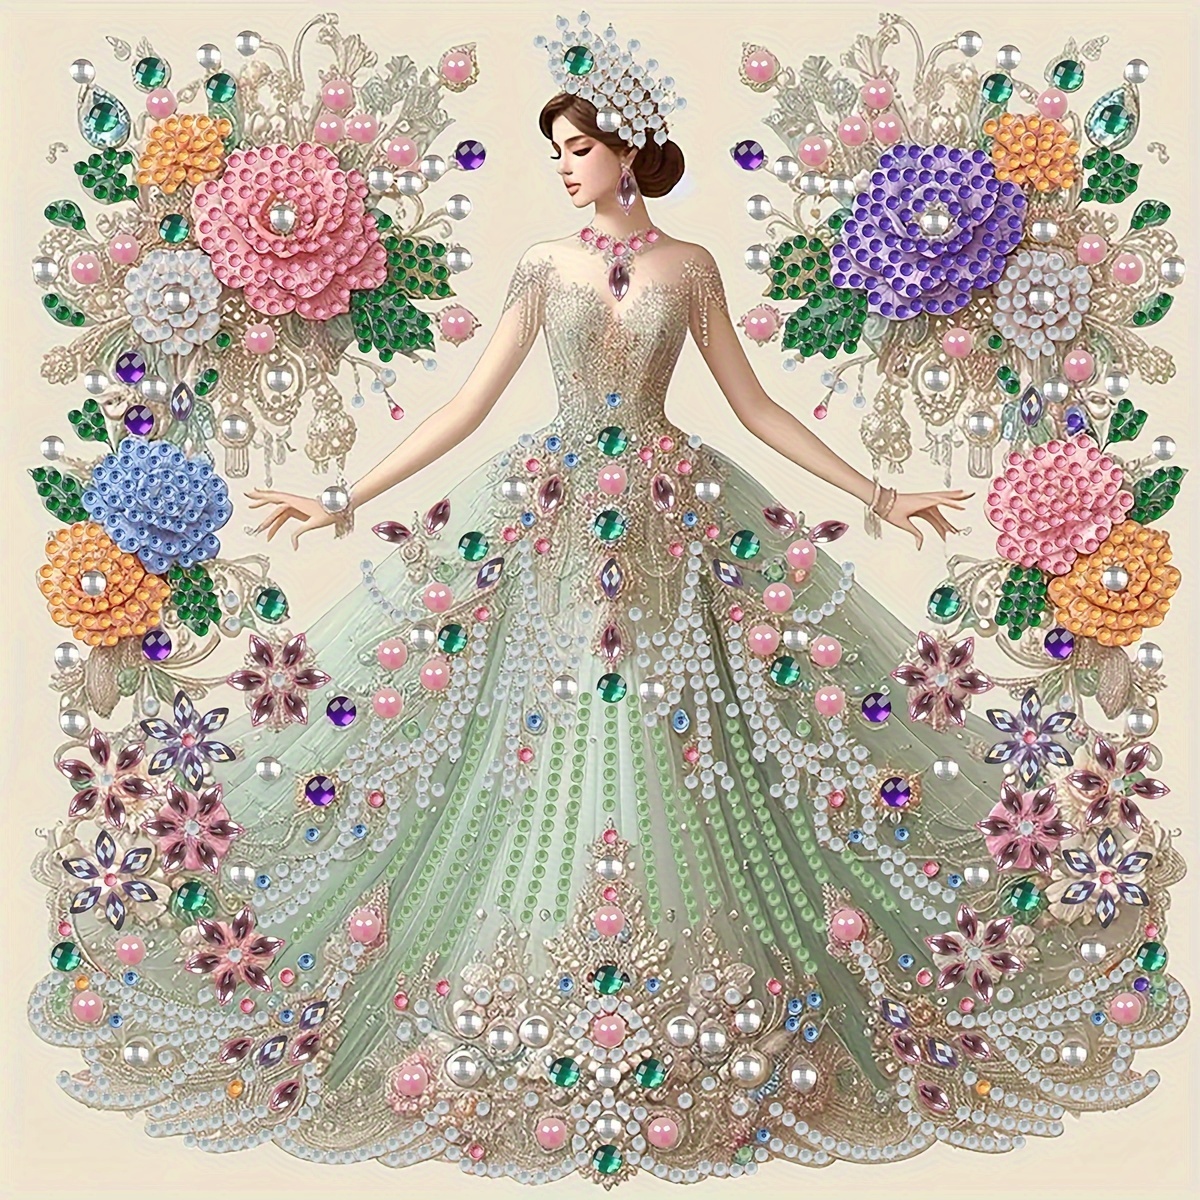 

30x30cm/11.8x11.8inch Diamond Painting Kit: Elegant Lady In A Gown, 5d Diy Crystal Mosaic Art, Handmade, Perfect For Home And Office Decoration